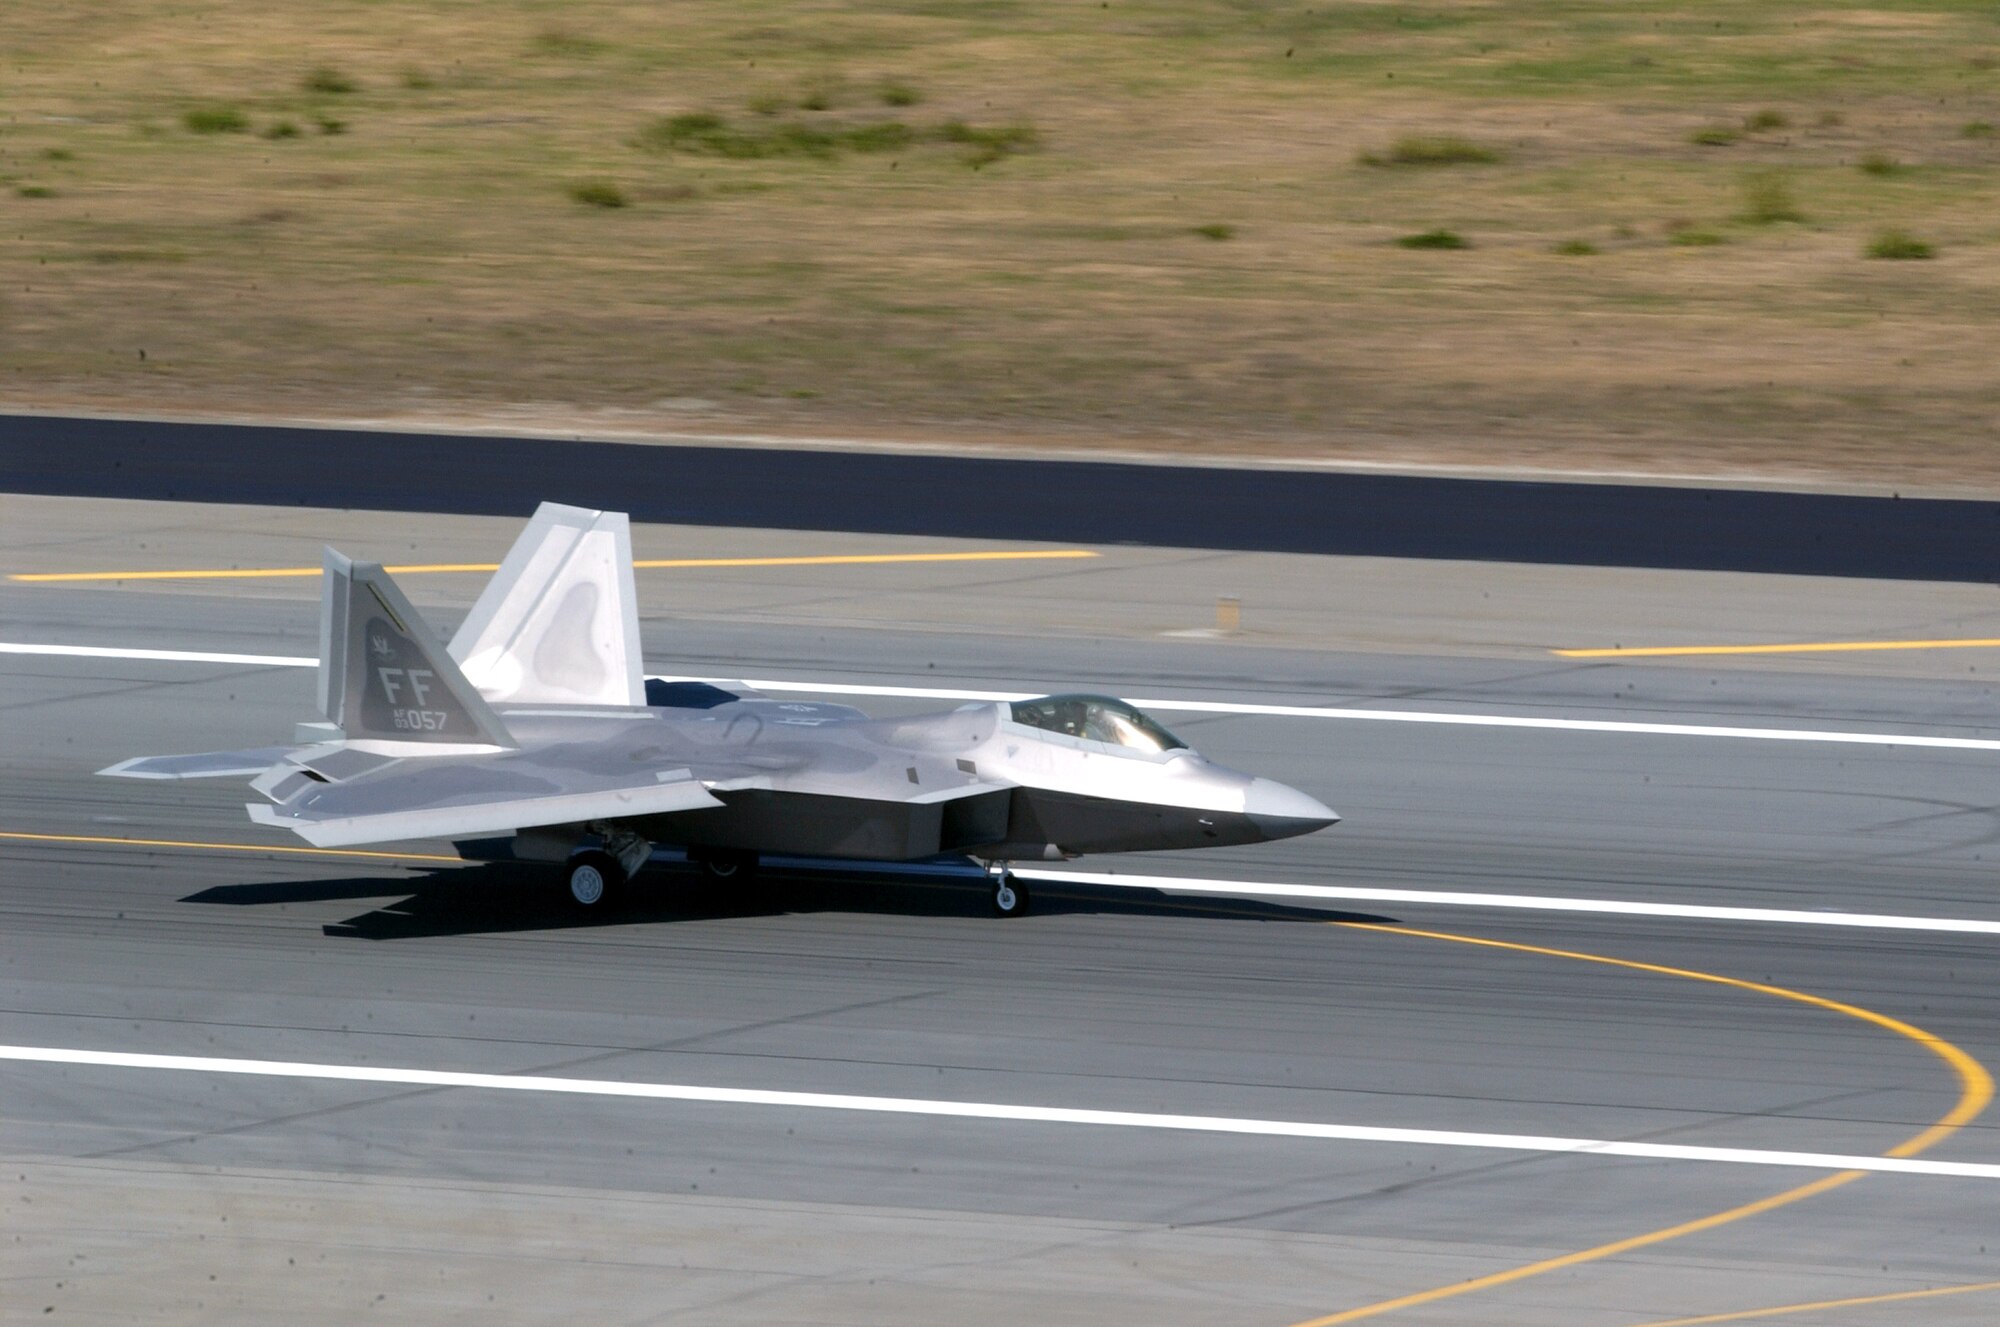 An F-22 Raptor taxis after landing at Elmendorf Air Force Base, Alaska, on Tuesday, May 23, 2006. Raptors from the 27th Fighter Squadron at Langley AFB, Va., are supporting Exercise Northern Edge 2006. The Air Force has selected Elmendorf as the home for the next operational F-22 squadron. The base will receive 36 Raptors, with the first jet expected in fall 2007. (U.S. Air Force photo/Staff Sgt. Dave Donovan) 